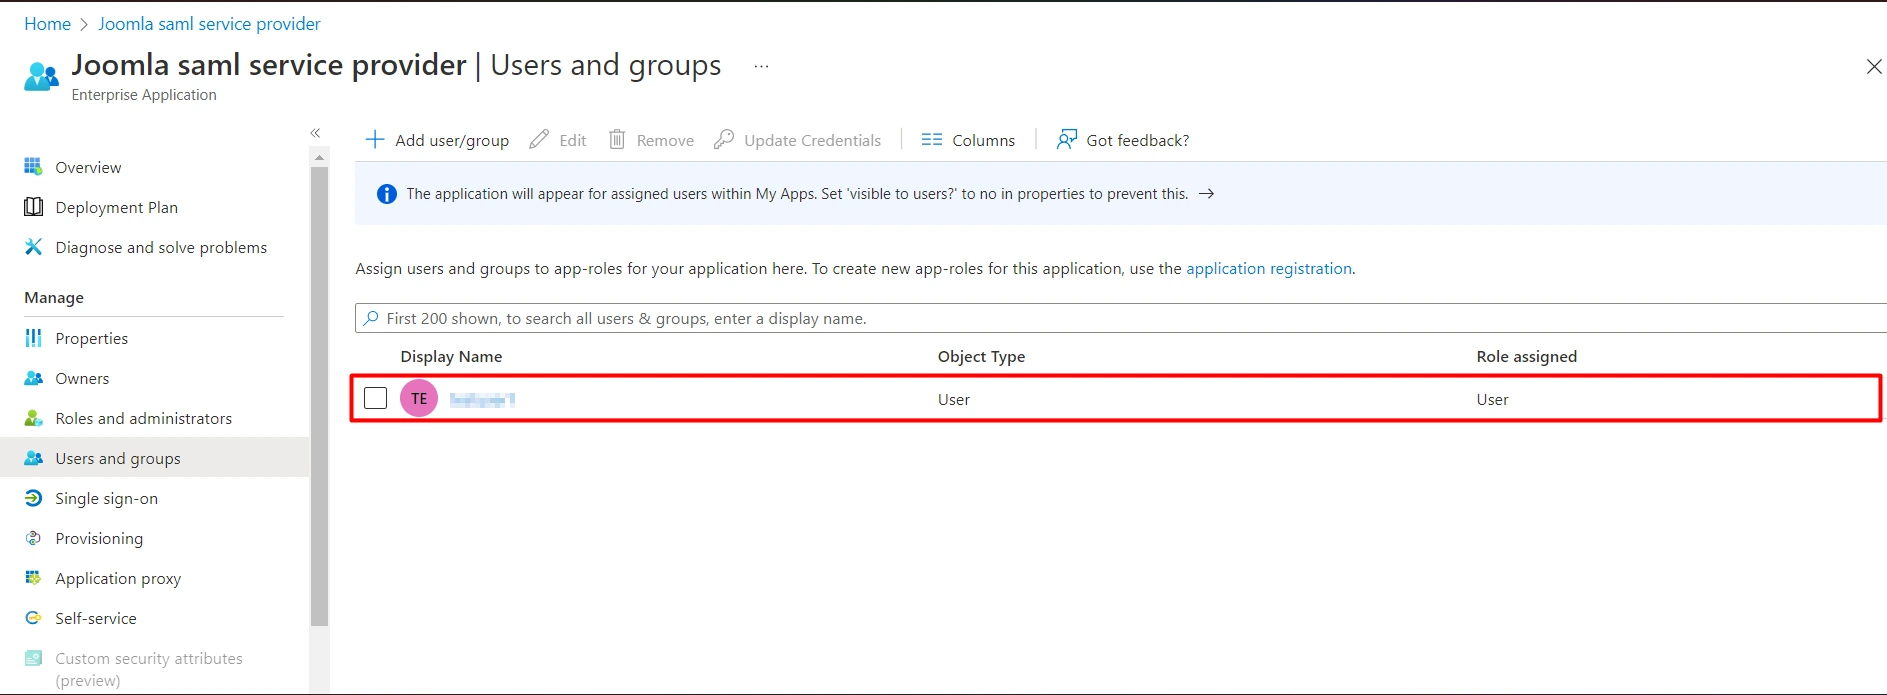 Azure AD SAML Single Sign-On SSO into Joomla, Azure Active Directory SSO- select Role,Assign